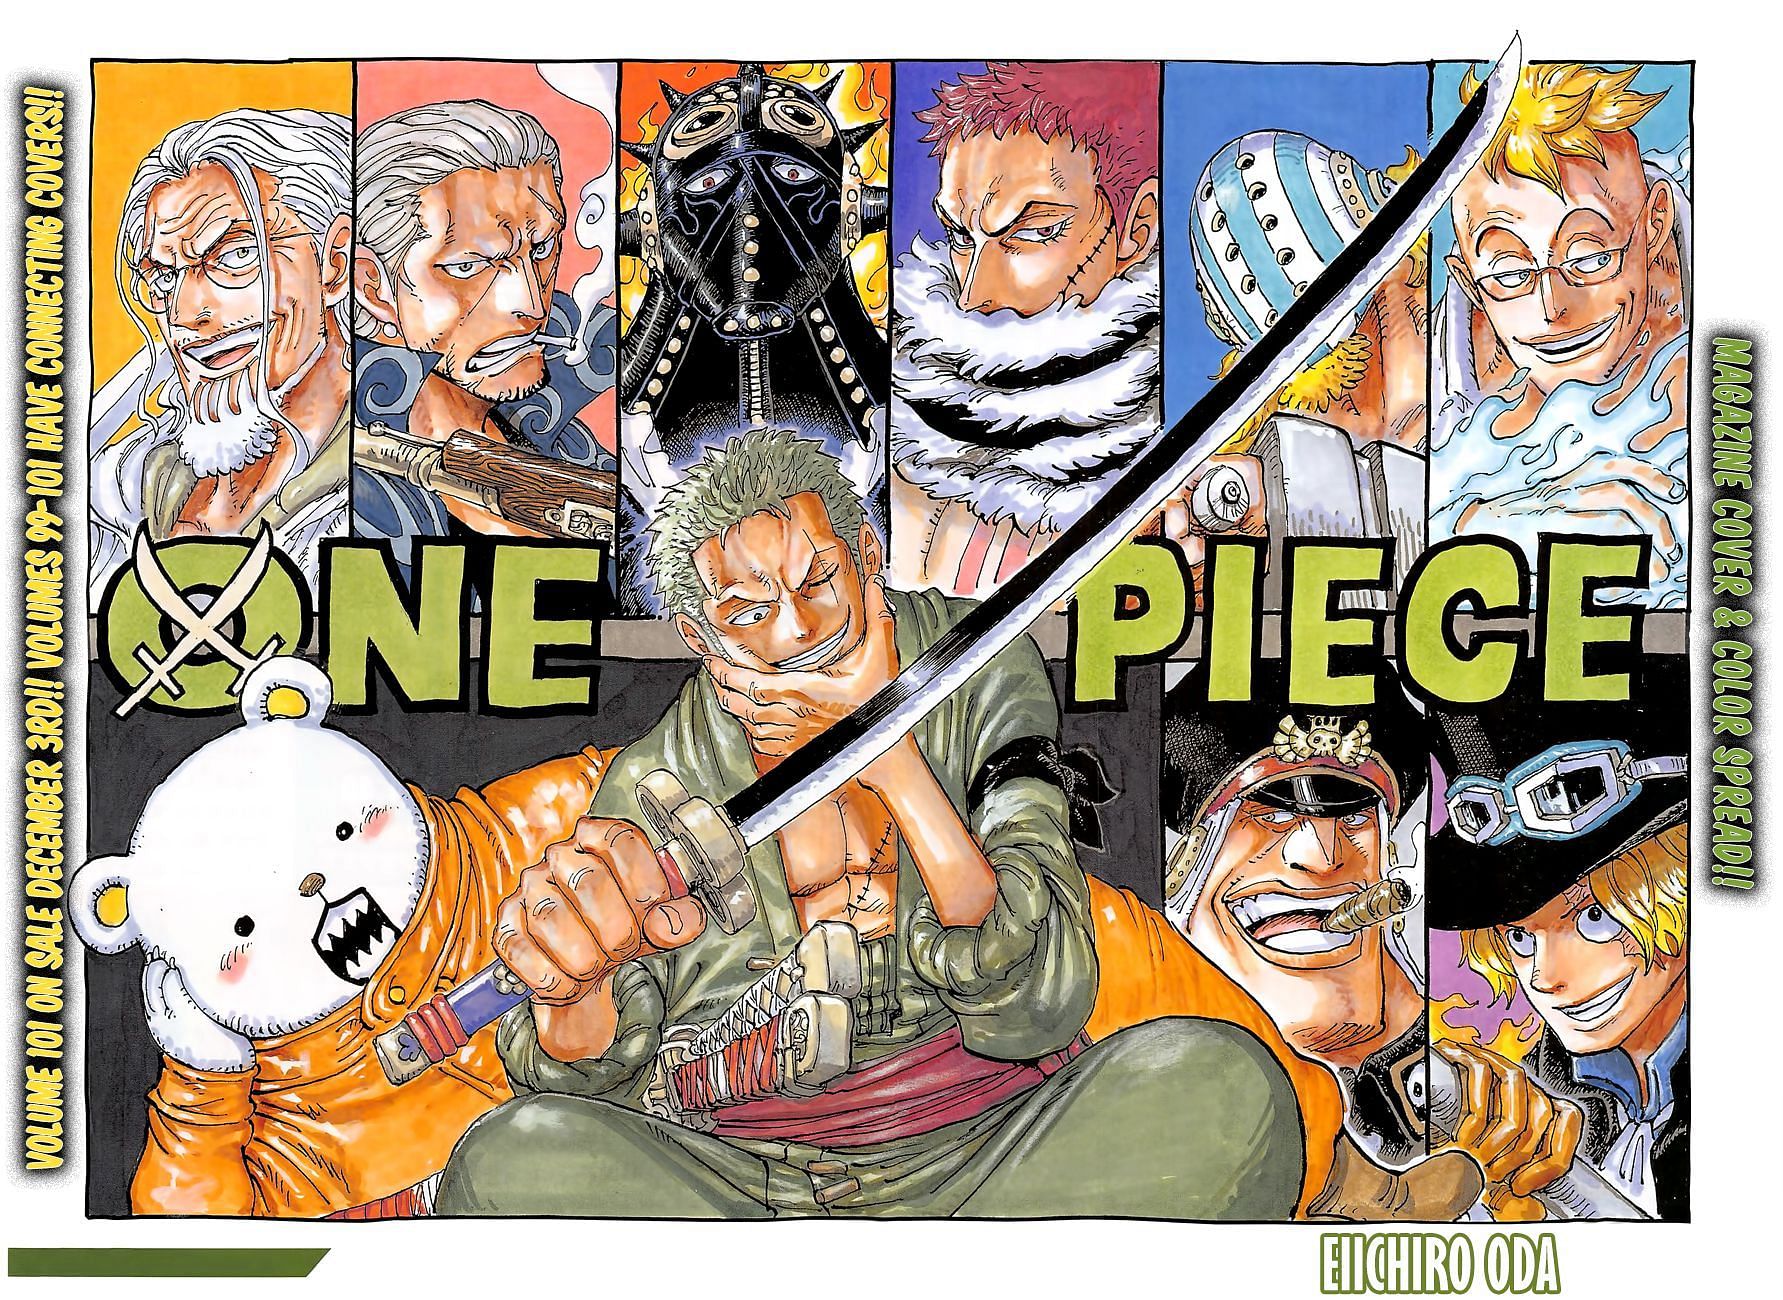 The One Piece Chapter 1031 color spread, which functions as the cover for this week&#039;s chapter (Image Credits: Eiichiro Oda/Shueisha, Viz Media, One Piece)